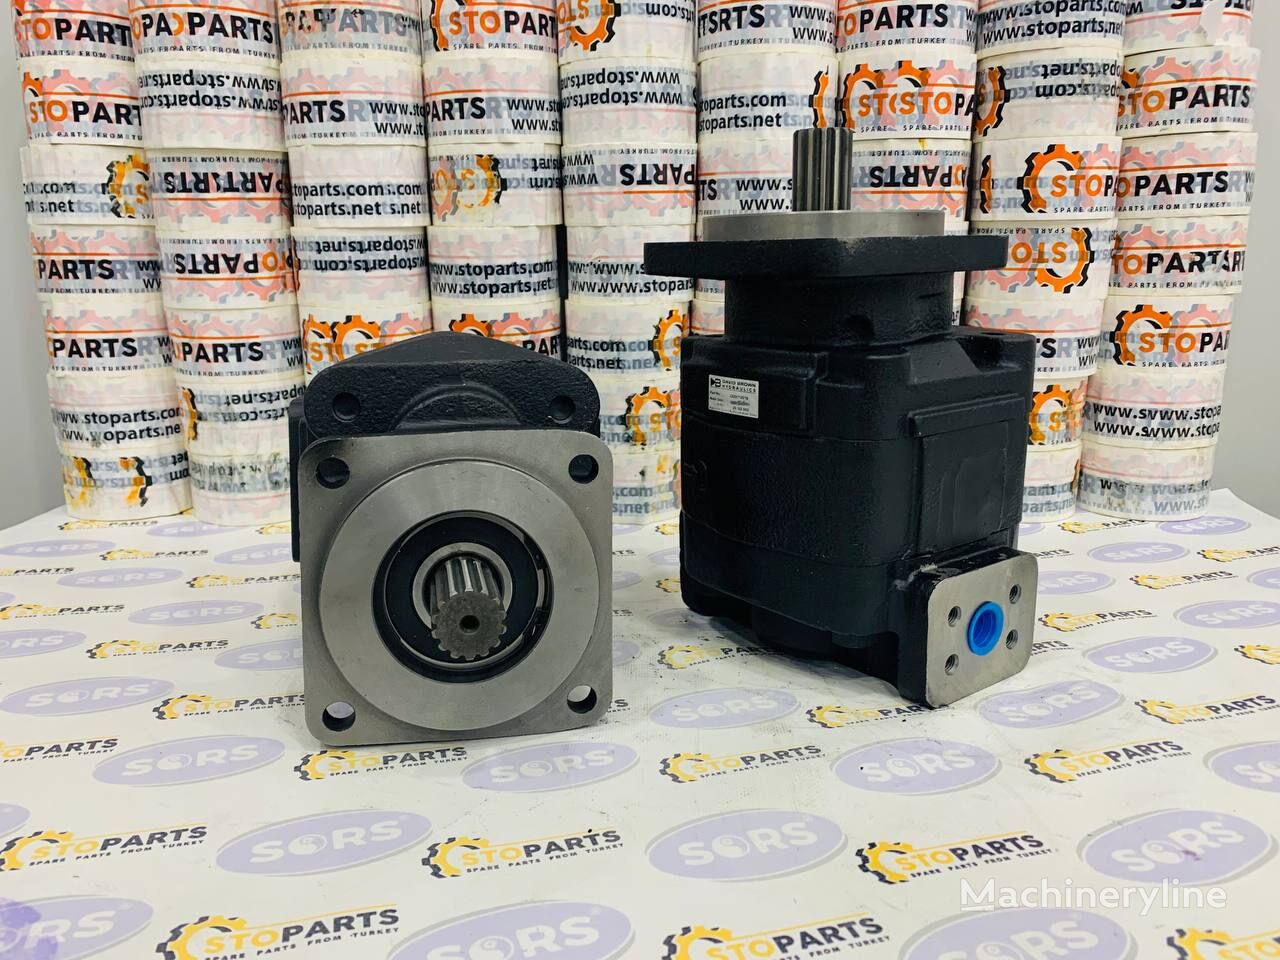 Parker (PGP365A278GEAB20-7) hydraulic pump for Atlas Copco excavator